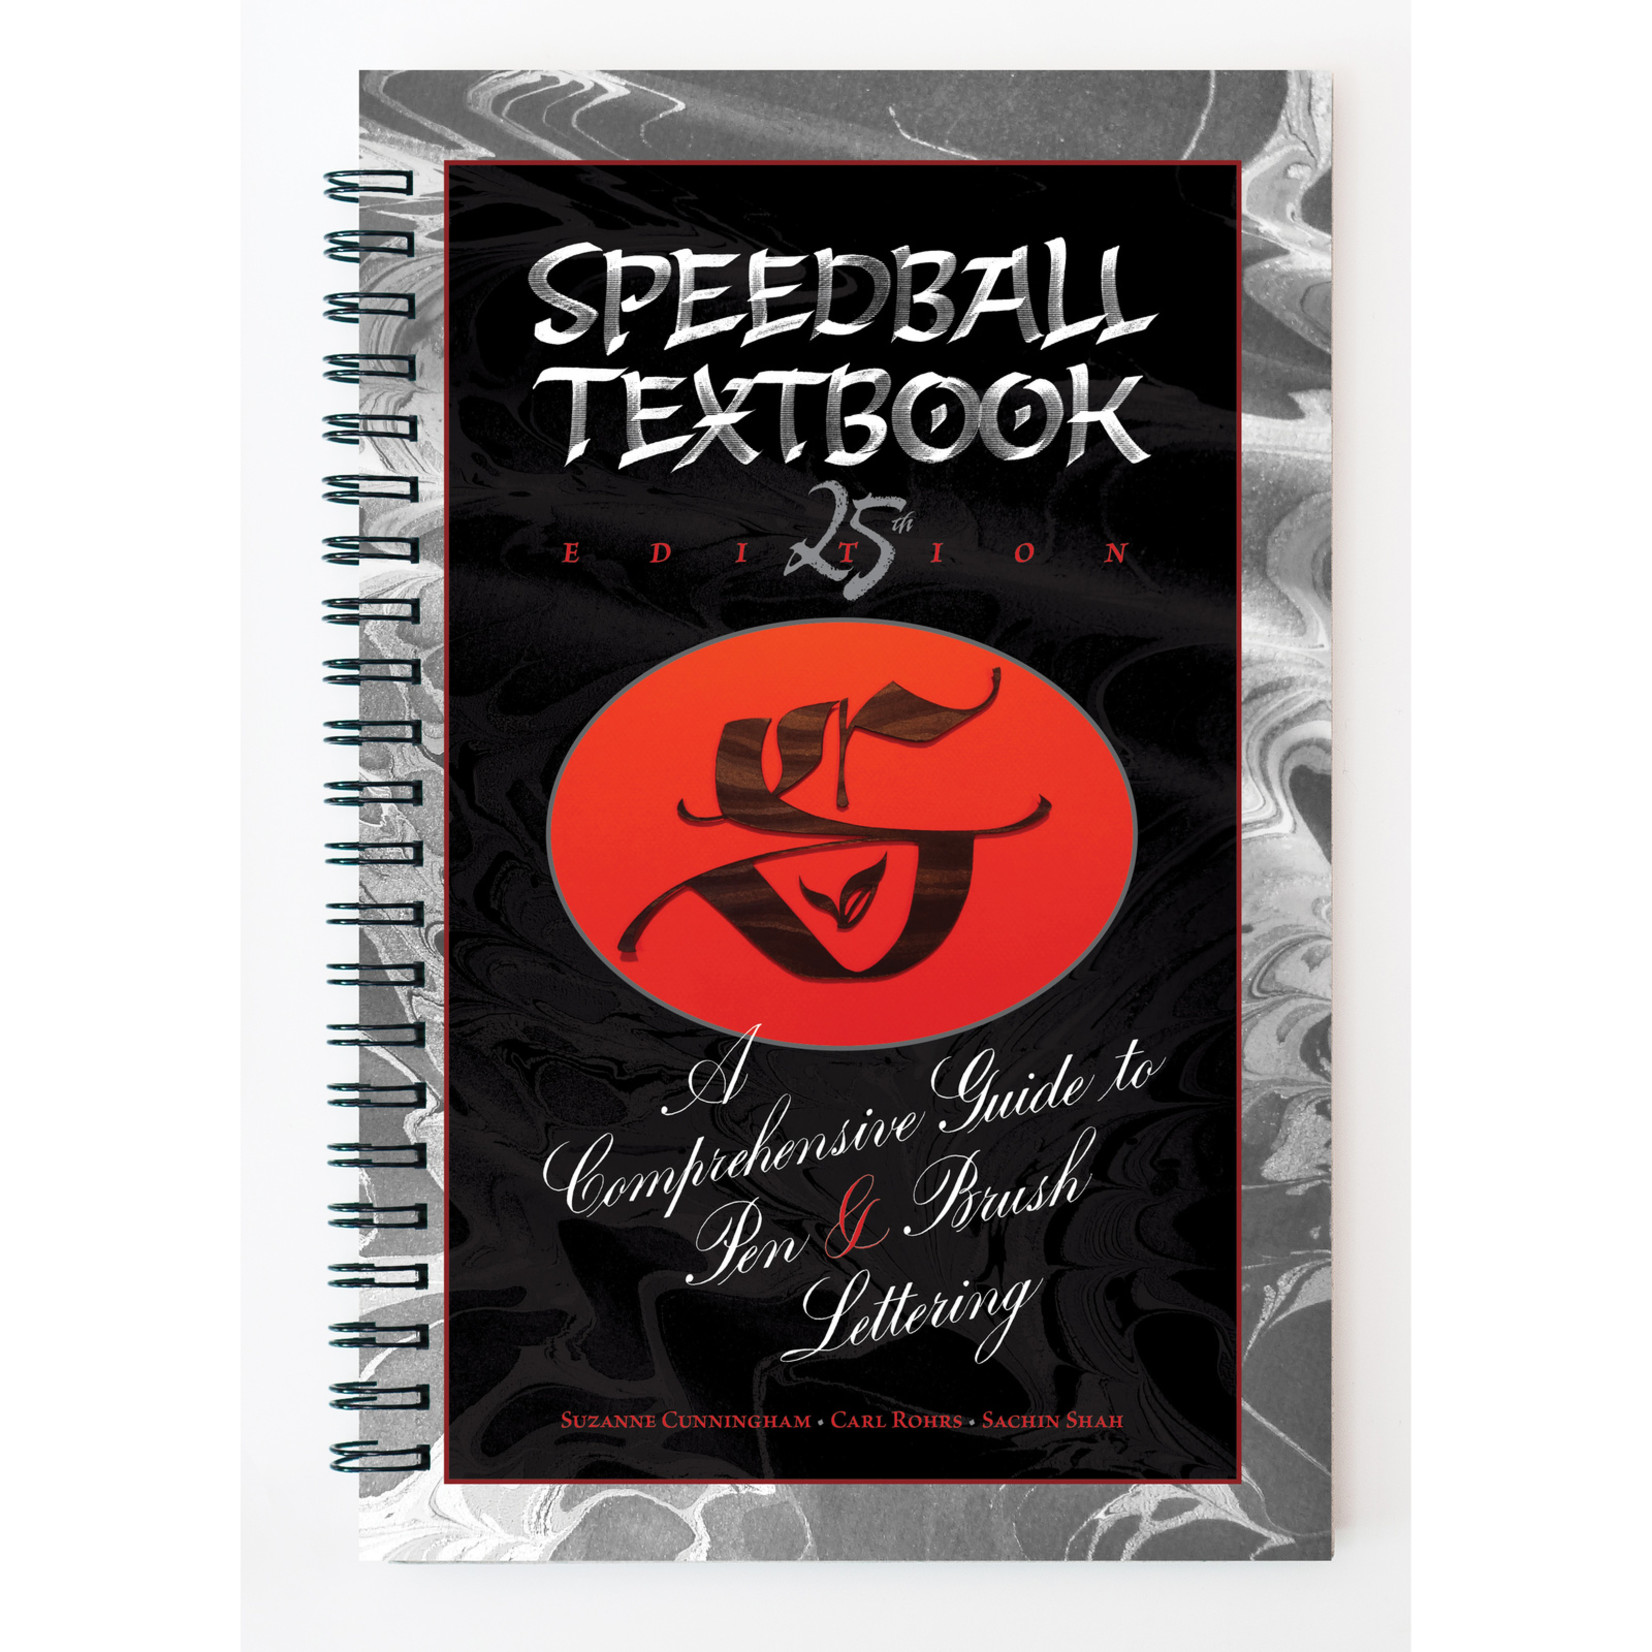 SPEEDBALL TEXTBOOK: A COMPREHENSIVE GUIDE TO PEN & BRUSH LETTERING